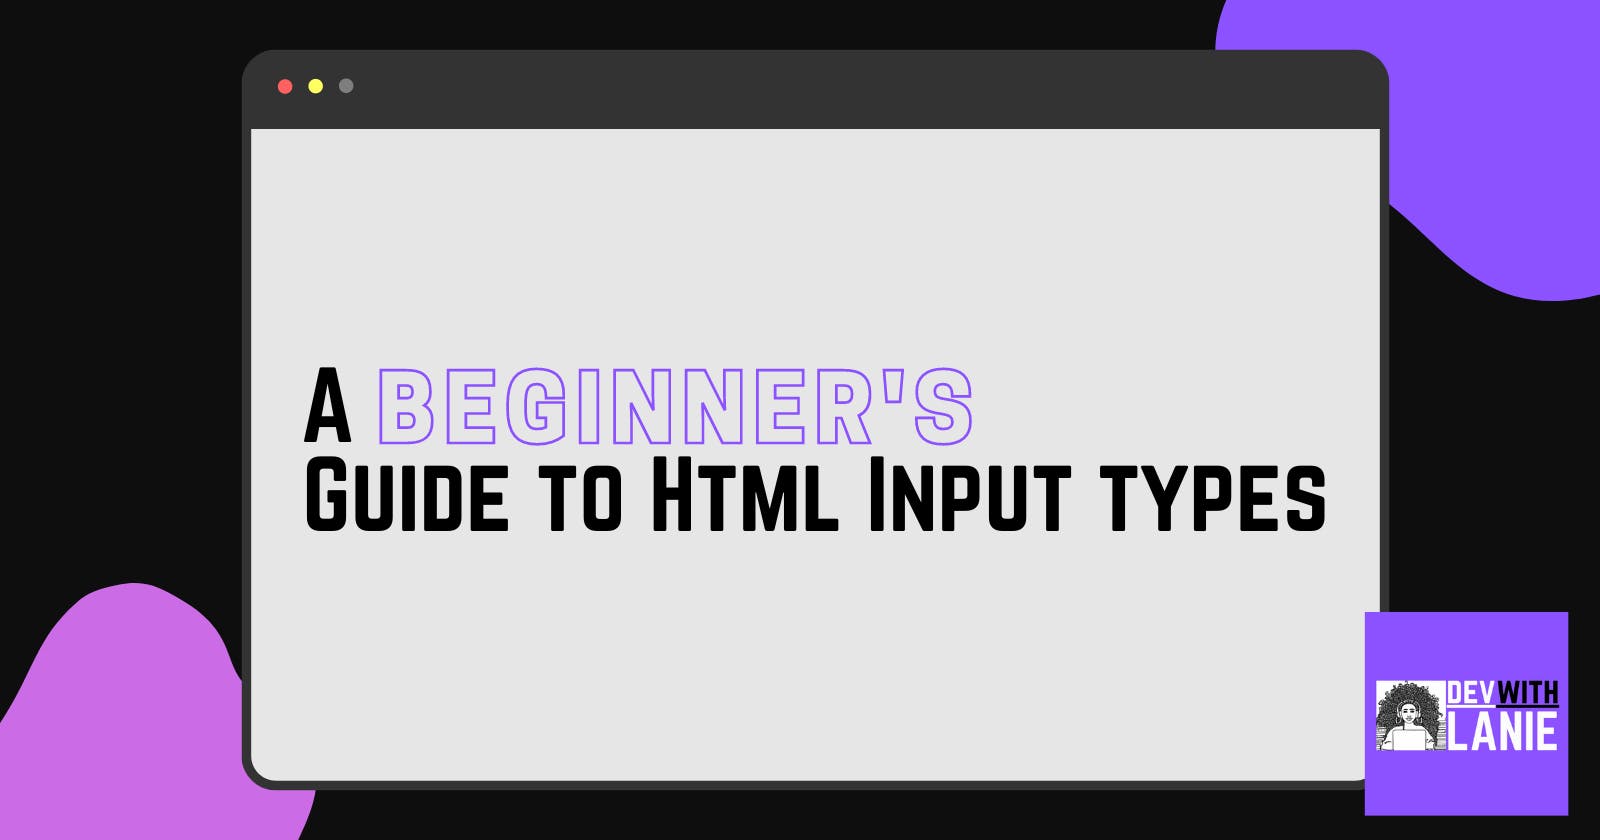 A Beginner's Guide to HTML Input Types